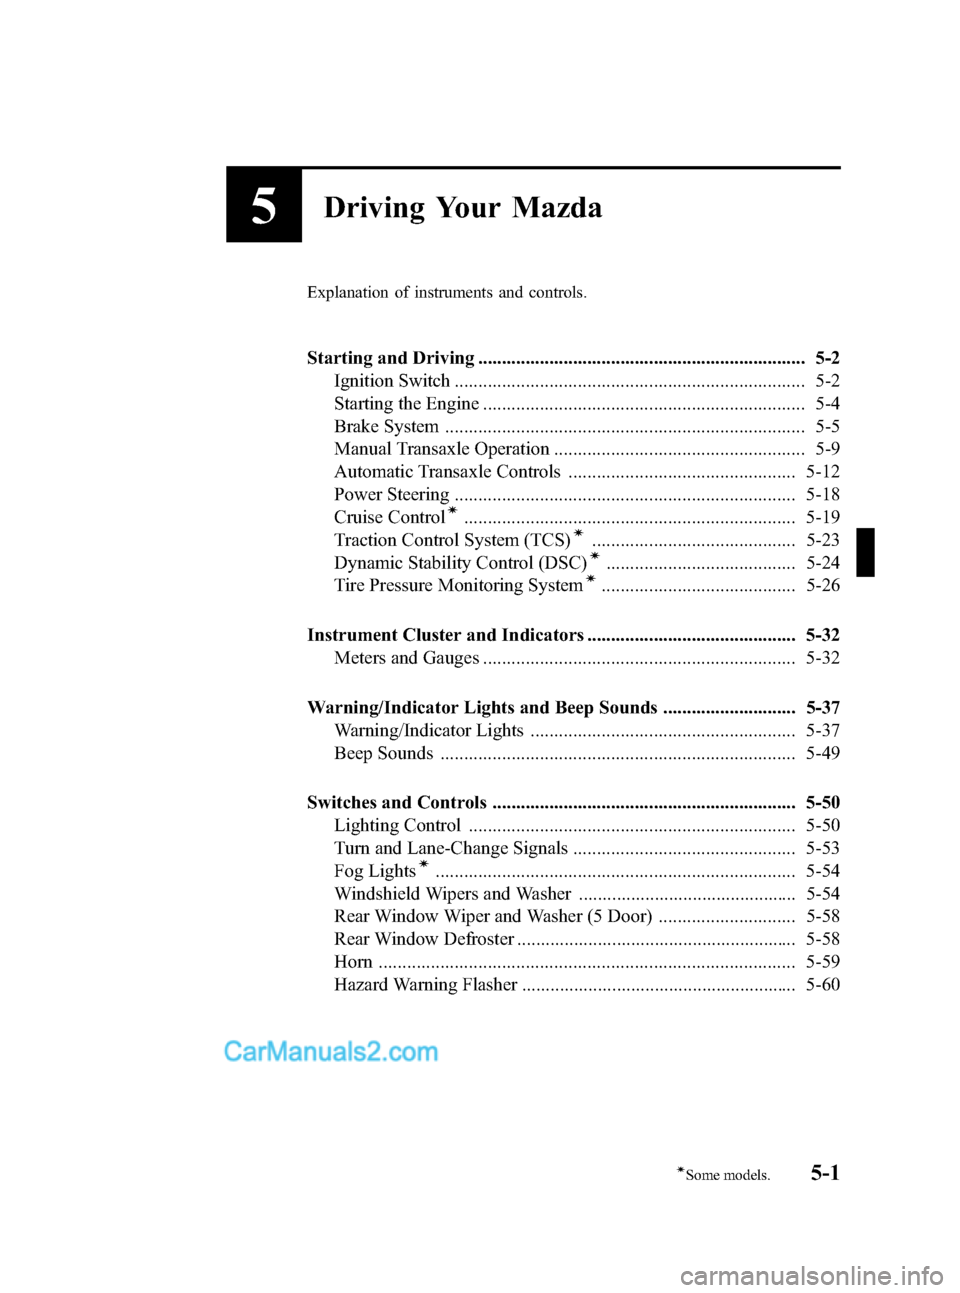 MAZDA MODEL MAZDASPEED 3 2008  Owners Manual (in English) Black plate (119,1)
5Driving Your Mazda
Explanation of instruments and controls.
Starting and Driving ..................................................................... 5-2
Ignition Switch ........